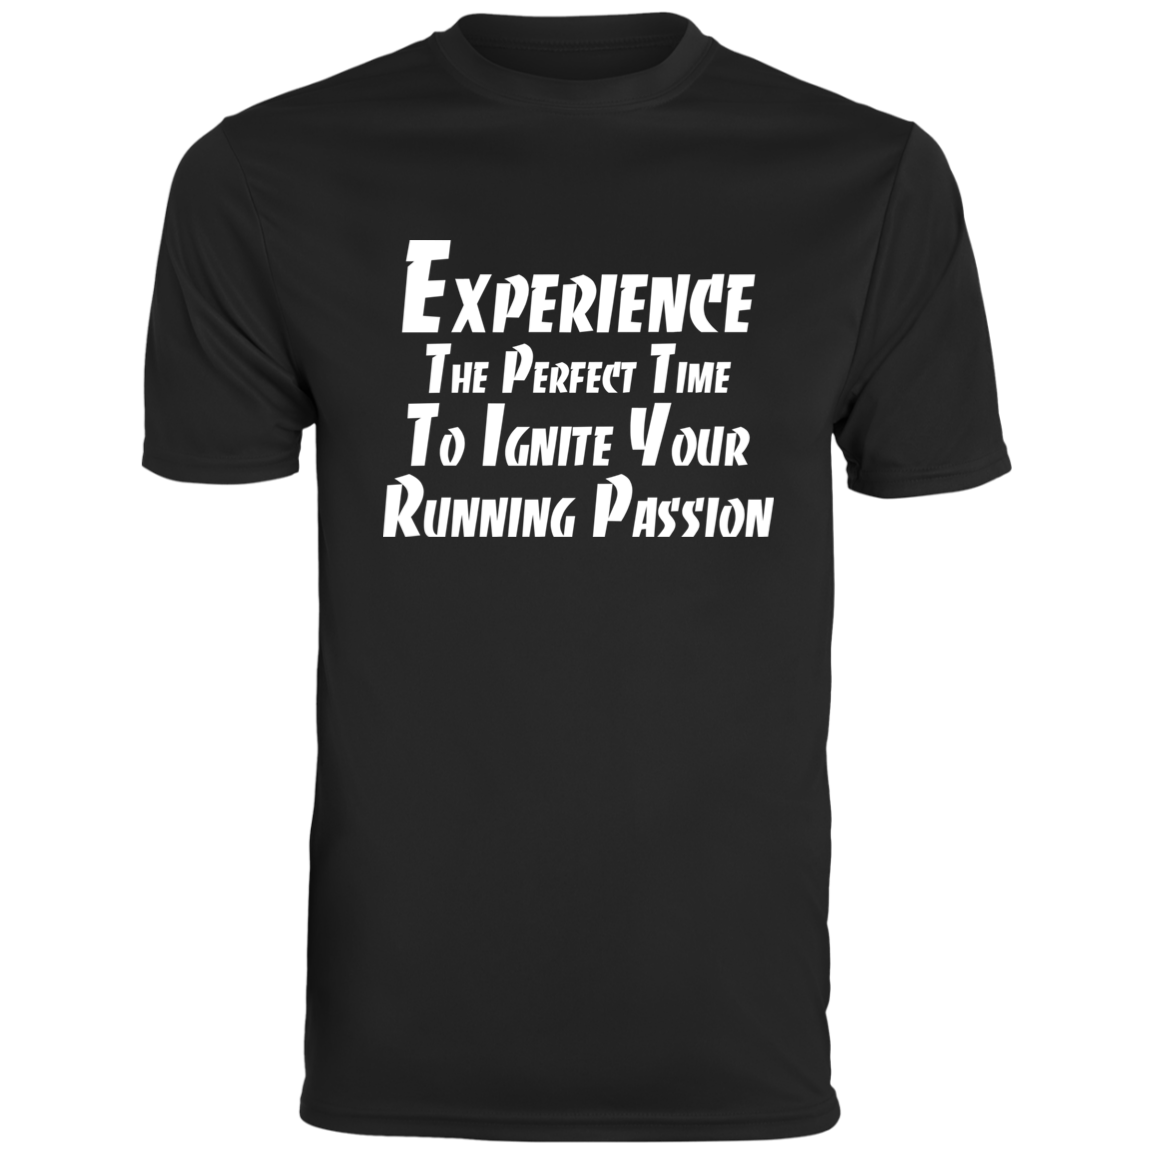 Men's Inspirational Top Experience the perfect time to ignite your running passion